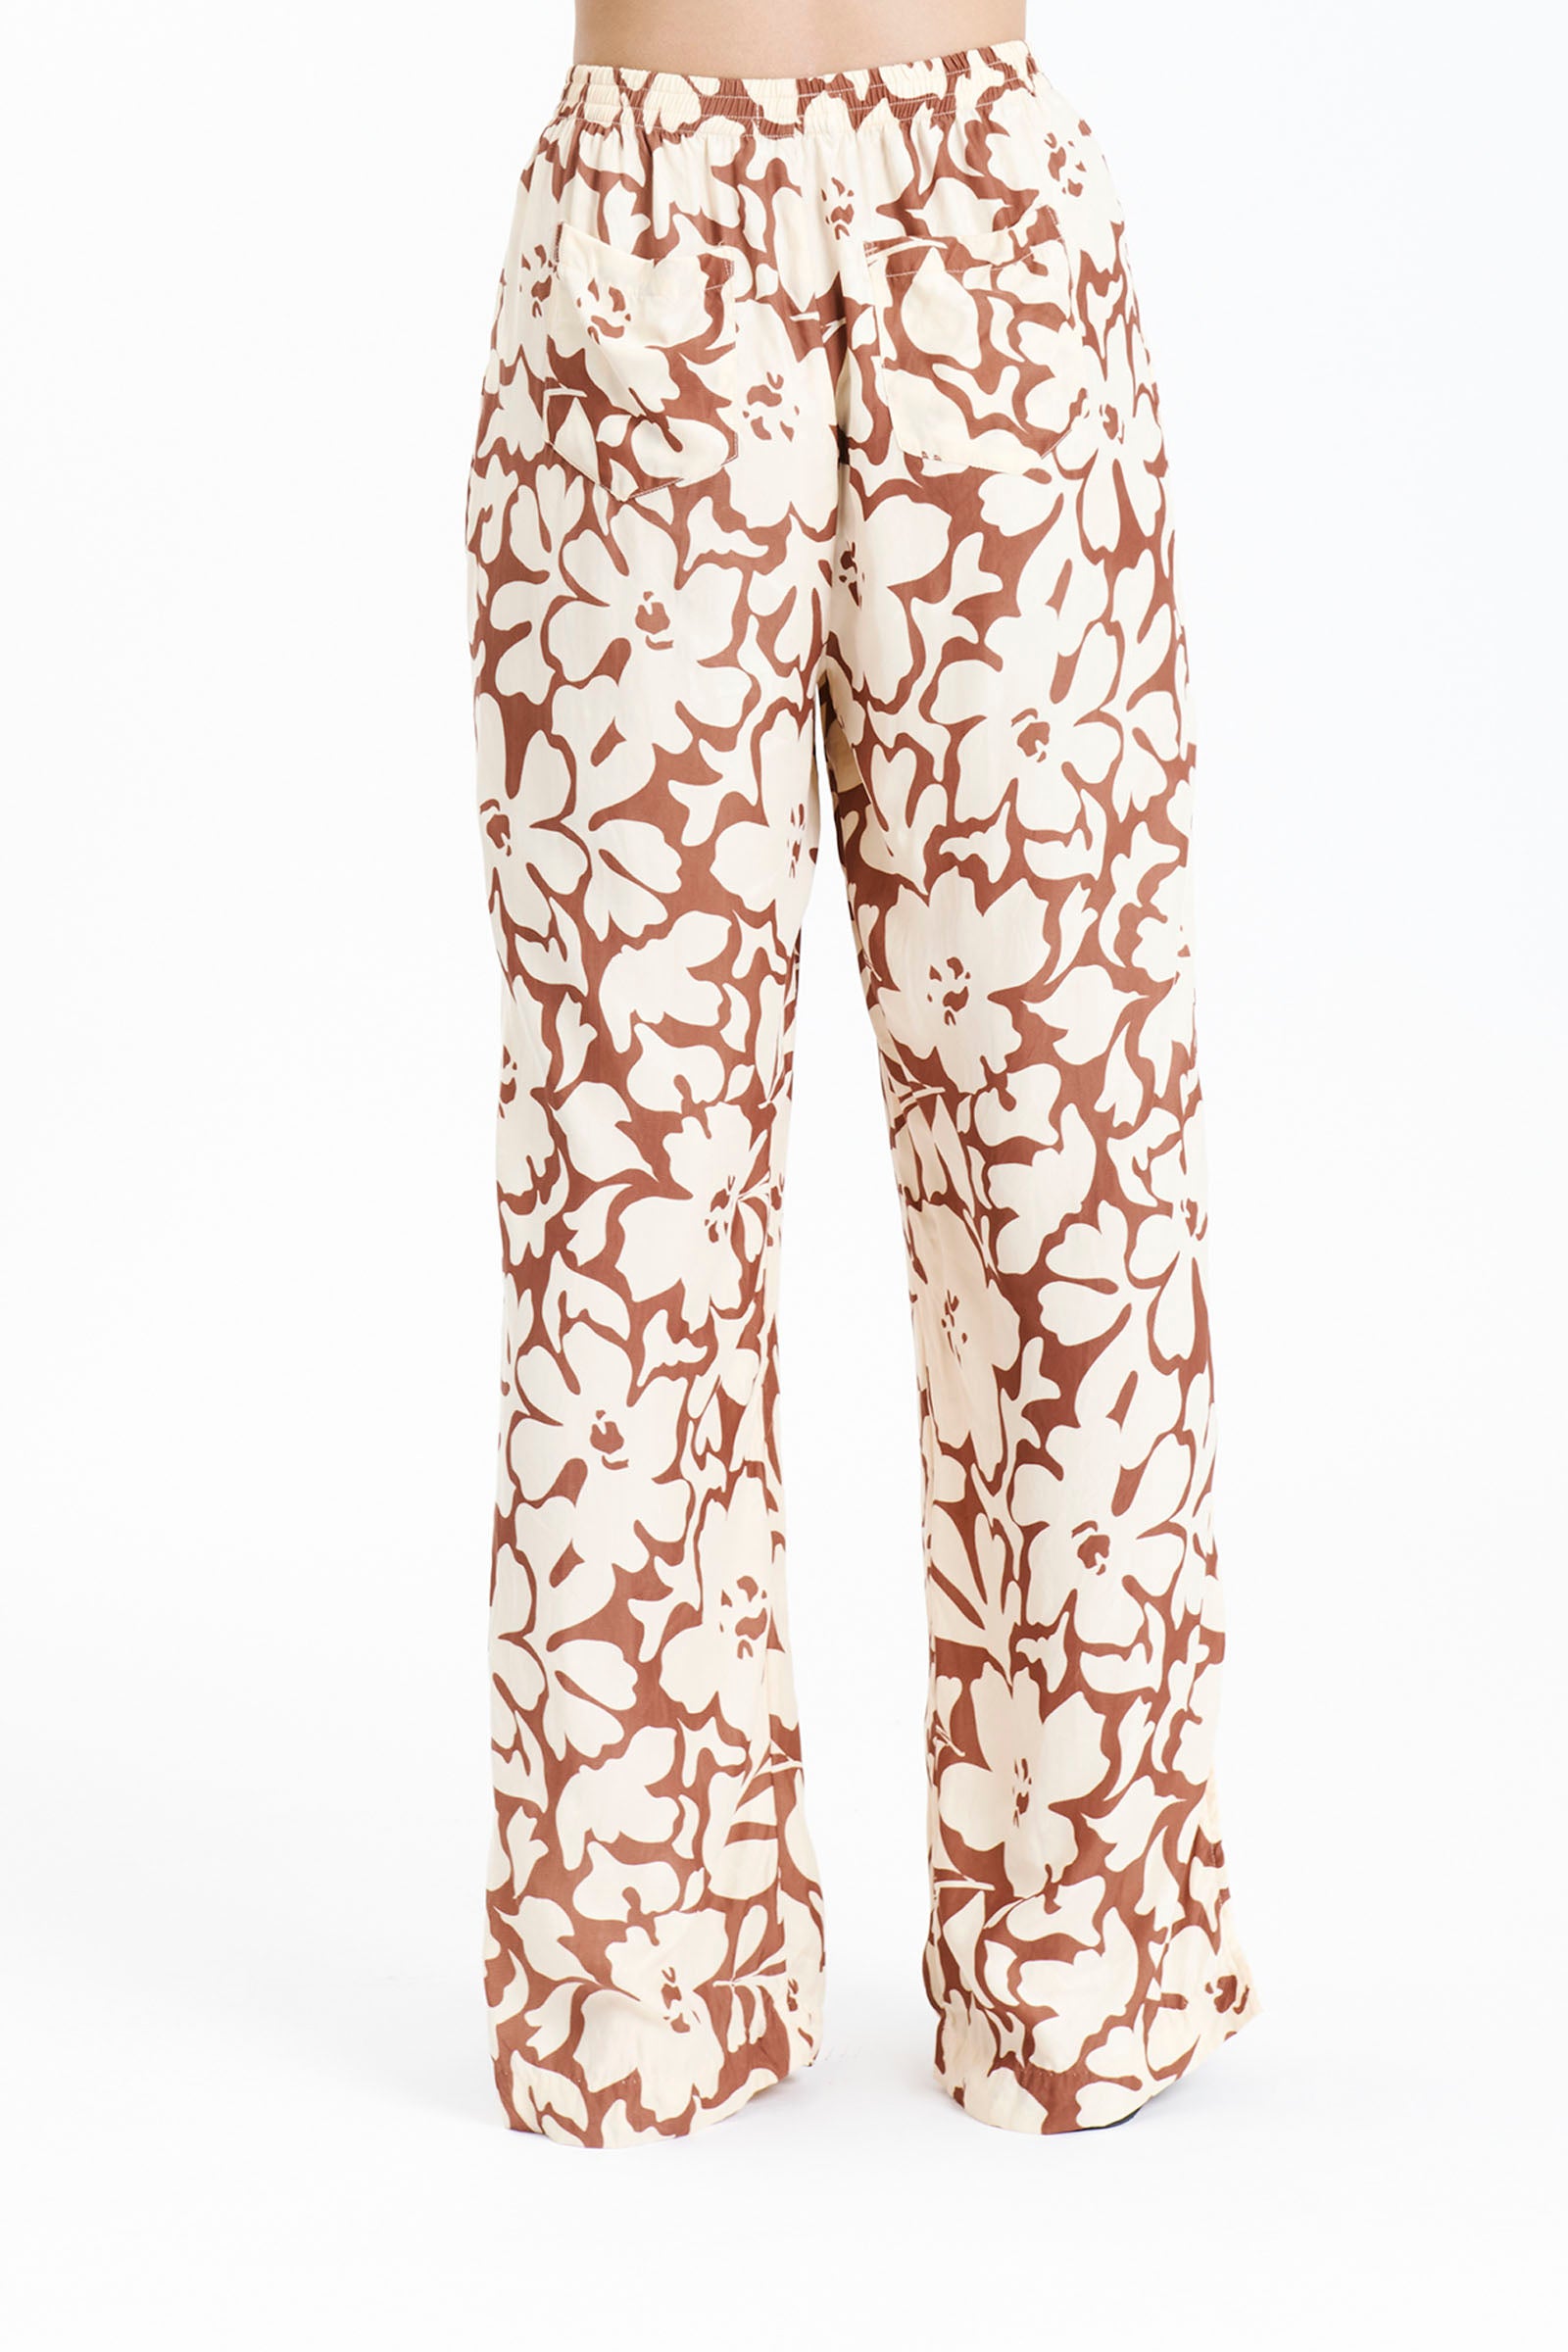 Nude Lucy Terra Pant In a Floral Print